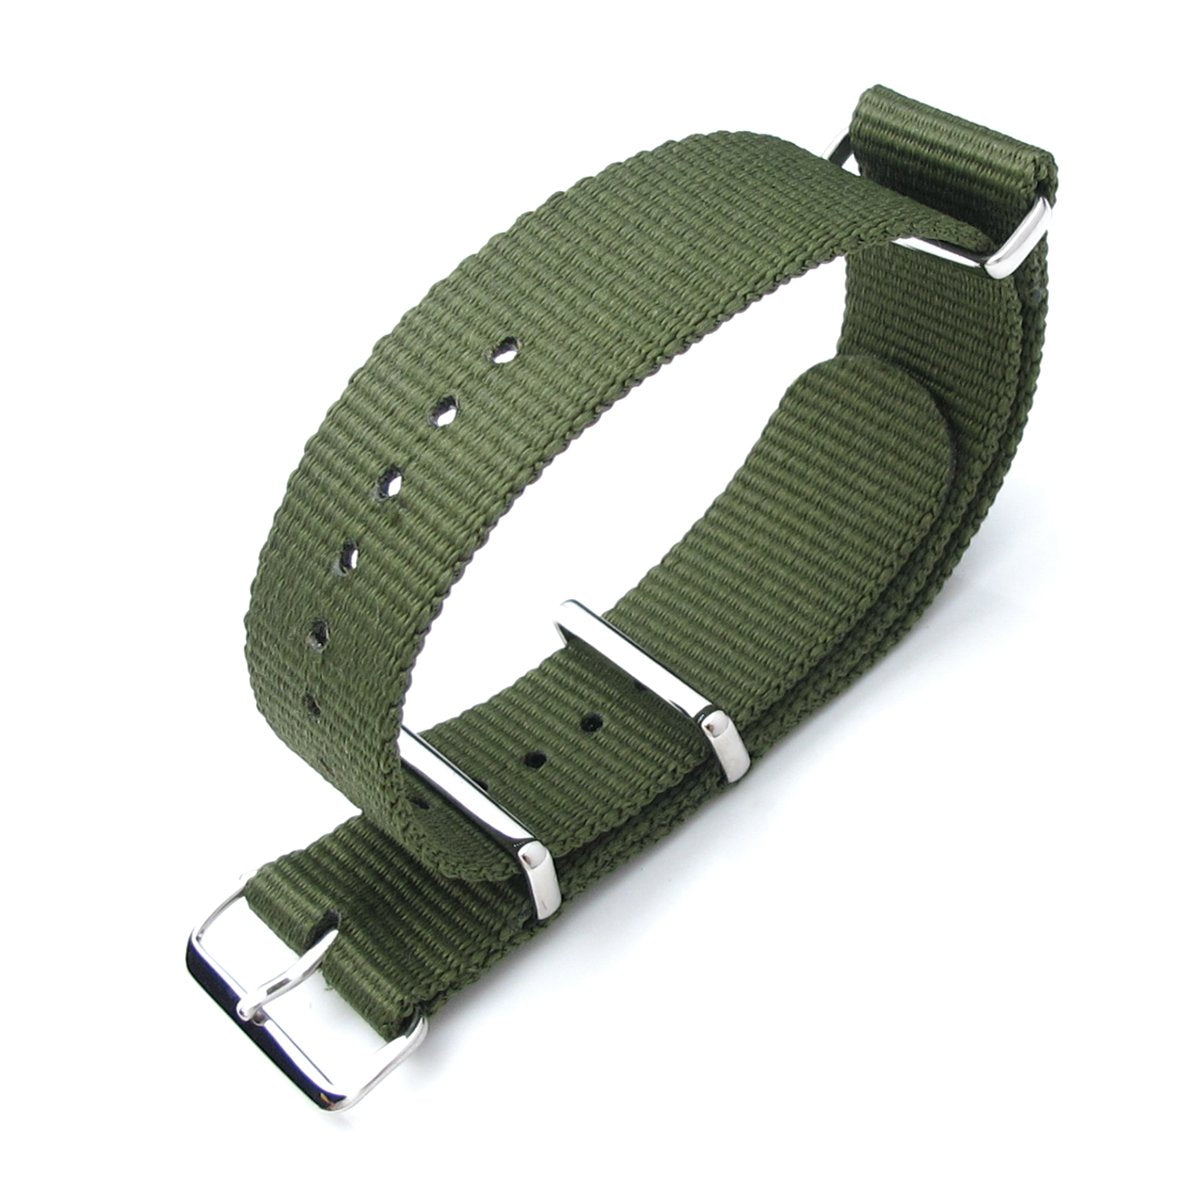 MiLTAT 21mm G10 NATO Military Watch Strap Ballistic Nylon Armband Polished Forest Green Strapcode Watch Bands